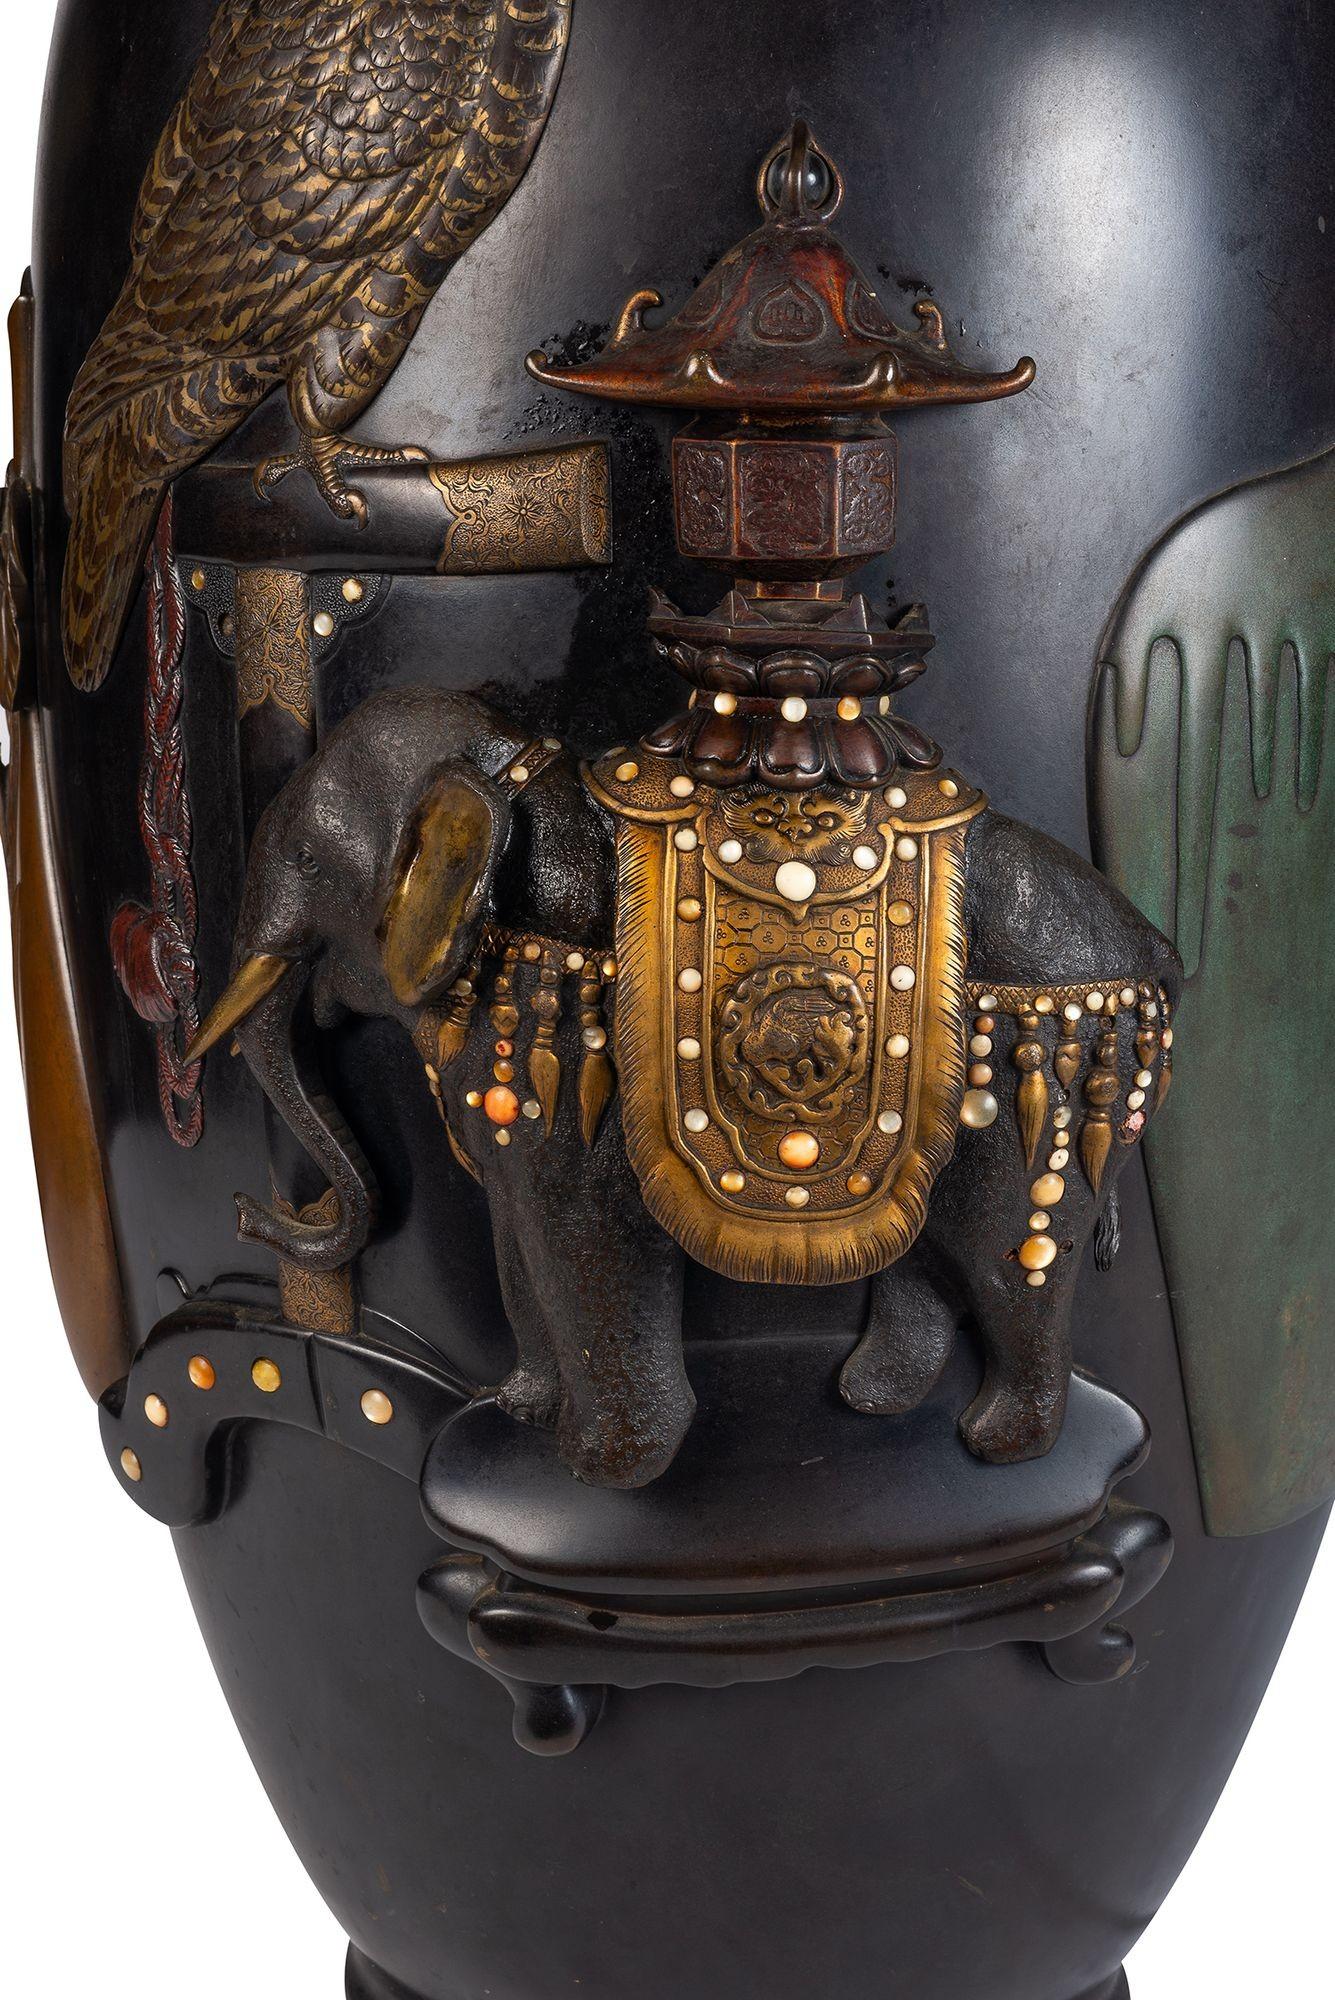 A wonderfully decorative Japanese Meiji period (1868-1912) patinated bronze and mixed metal vase. Depicting a bird of pray on a perch, an Elephant with a gilded saddle and carrying a pagoda carriage, and various patinated bronze vases and